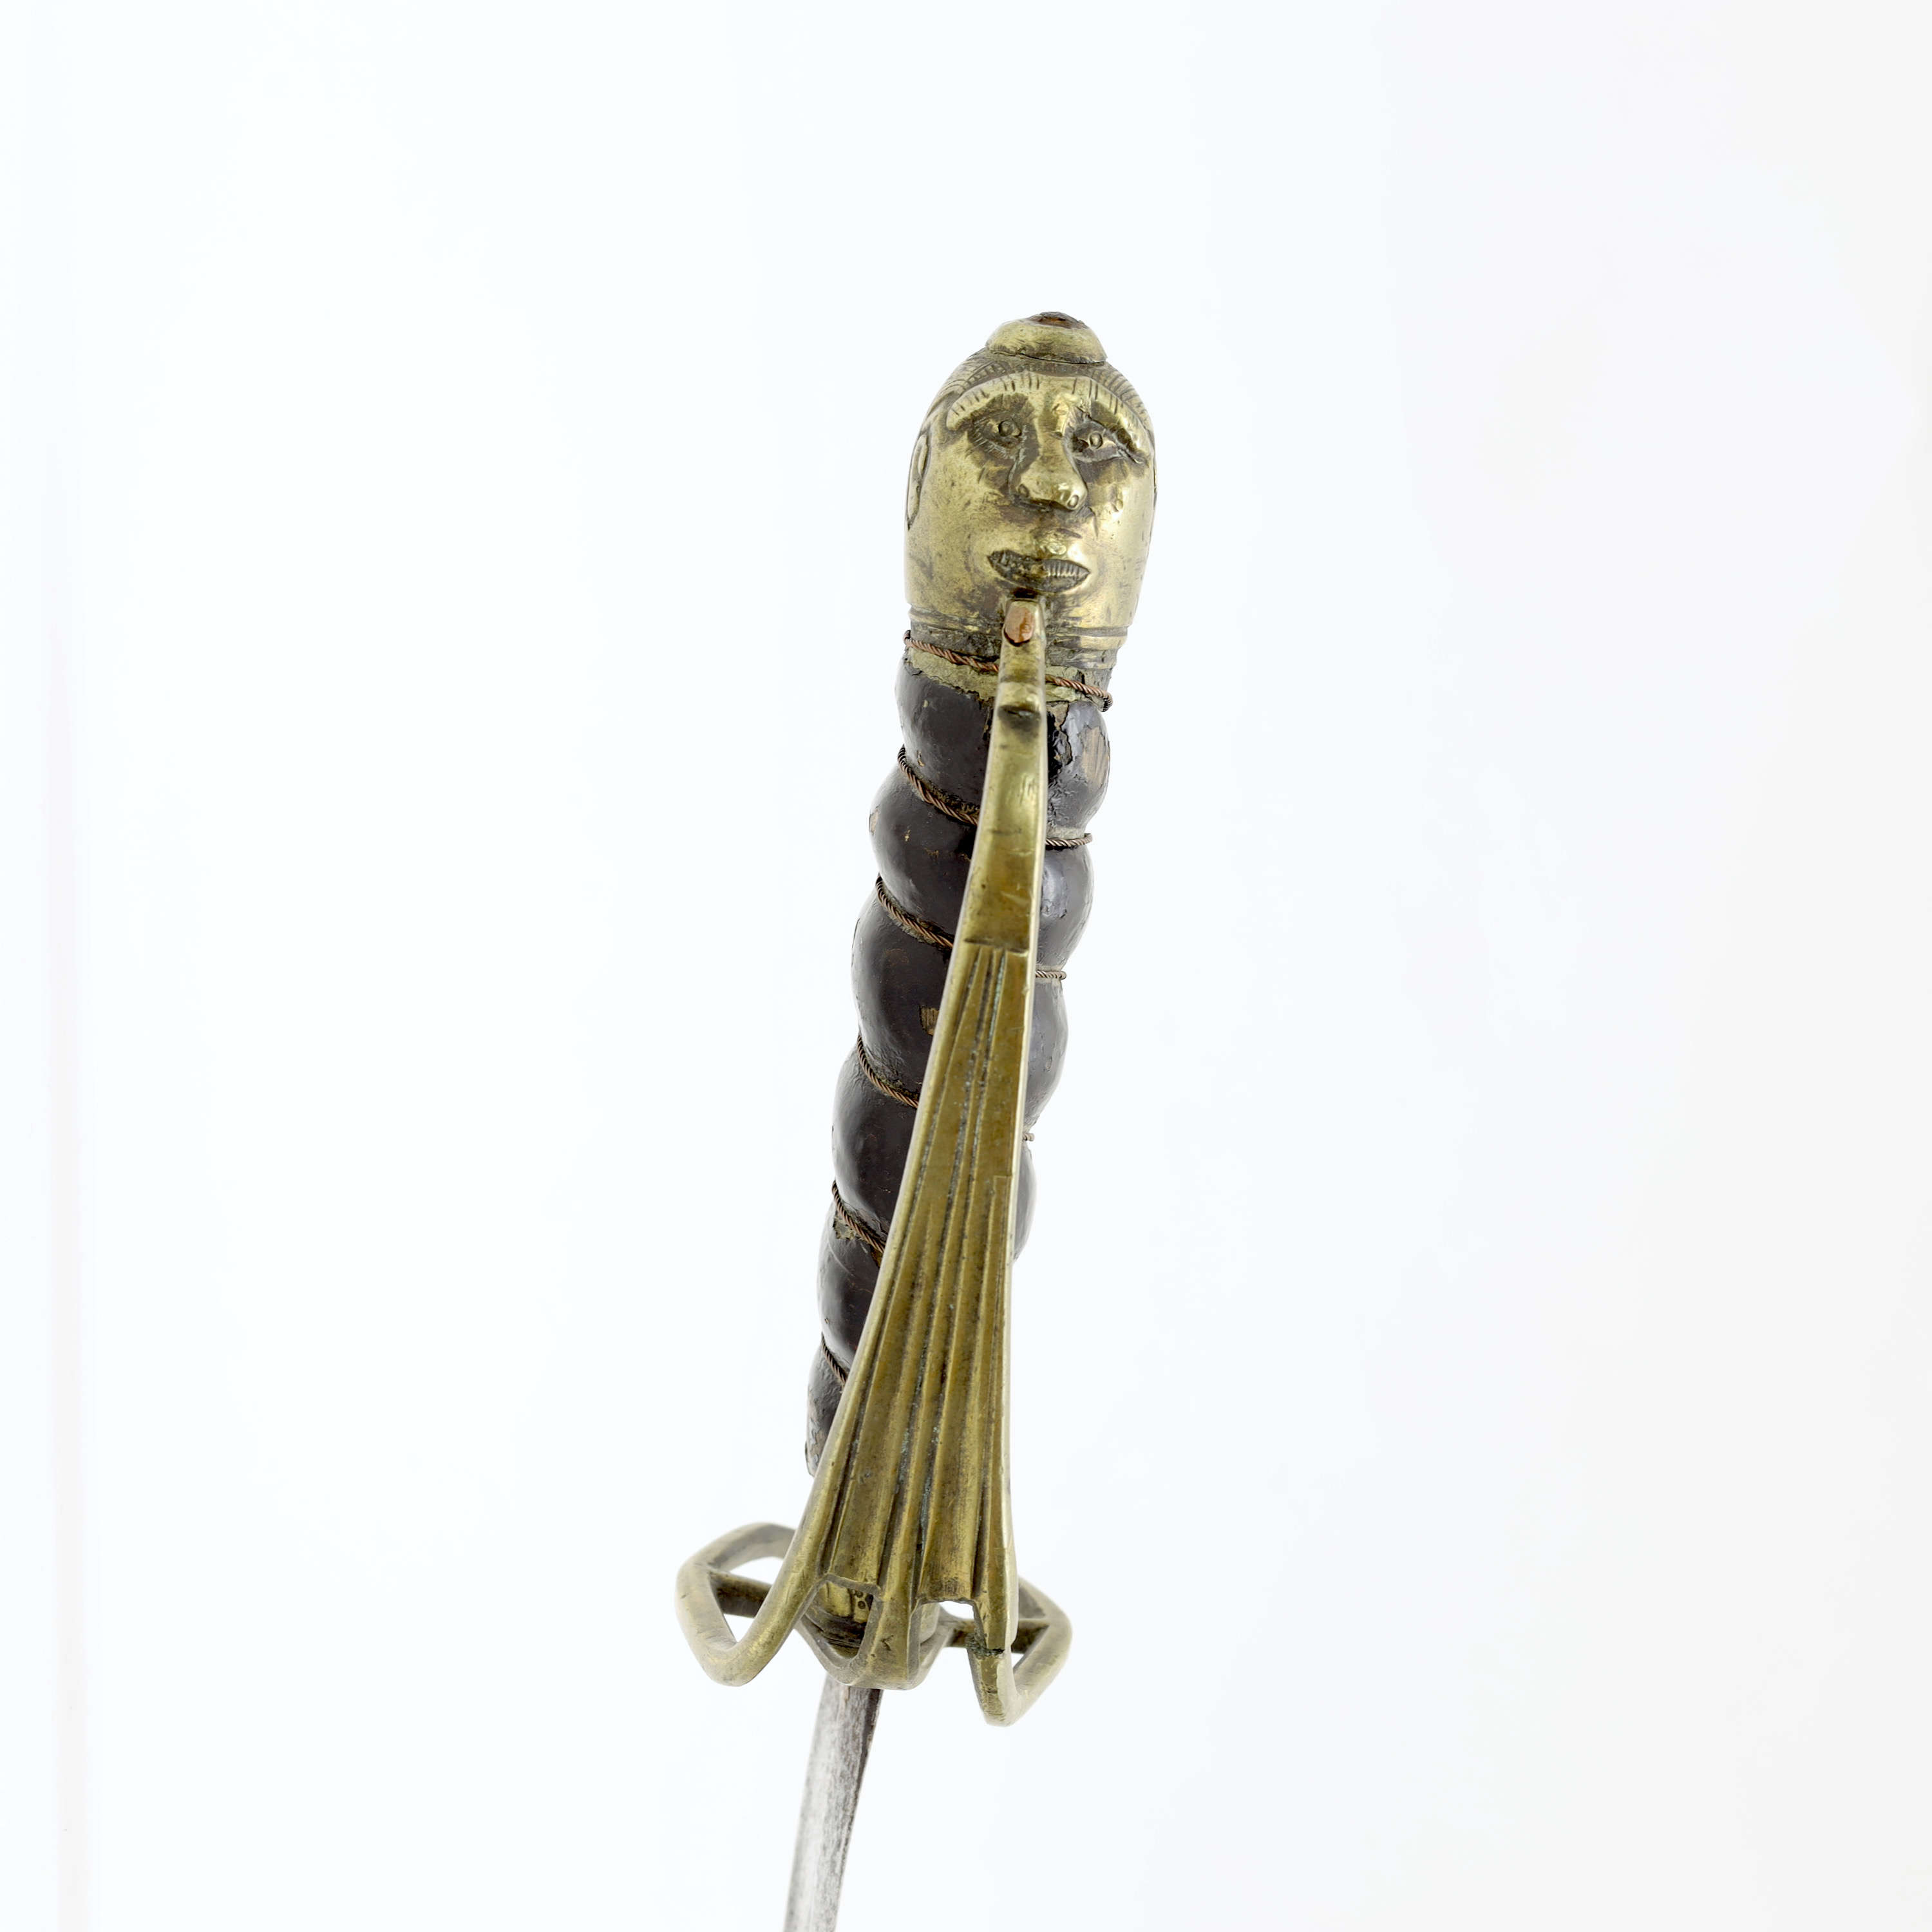 Unusual Chinese saber with figure head pommel